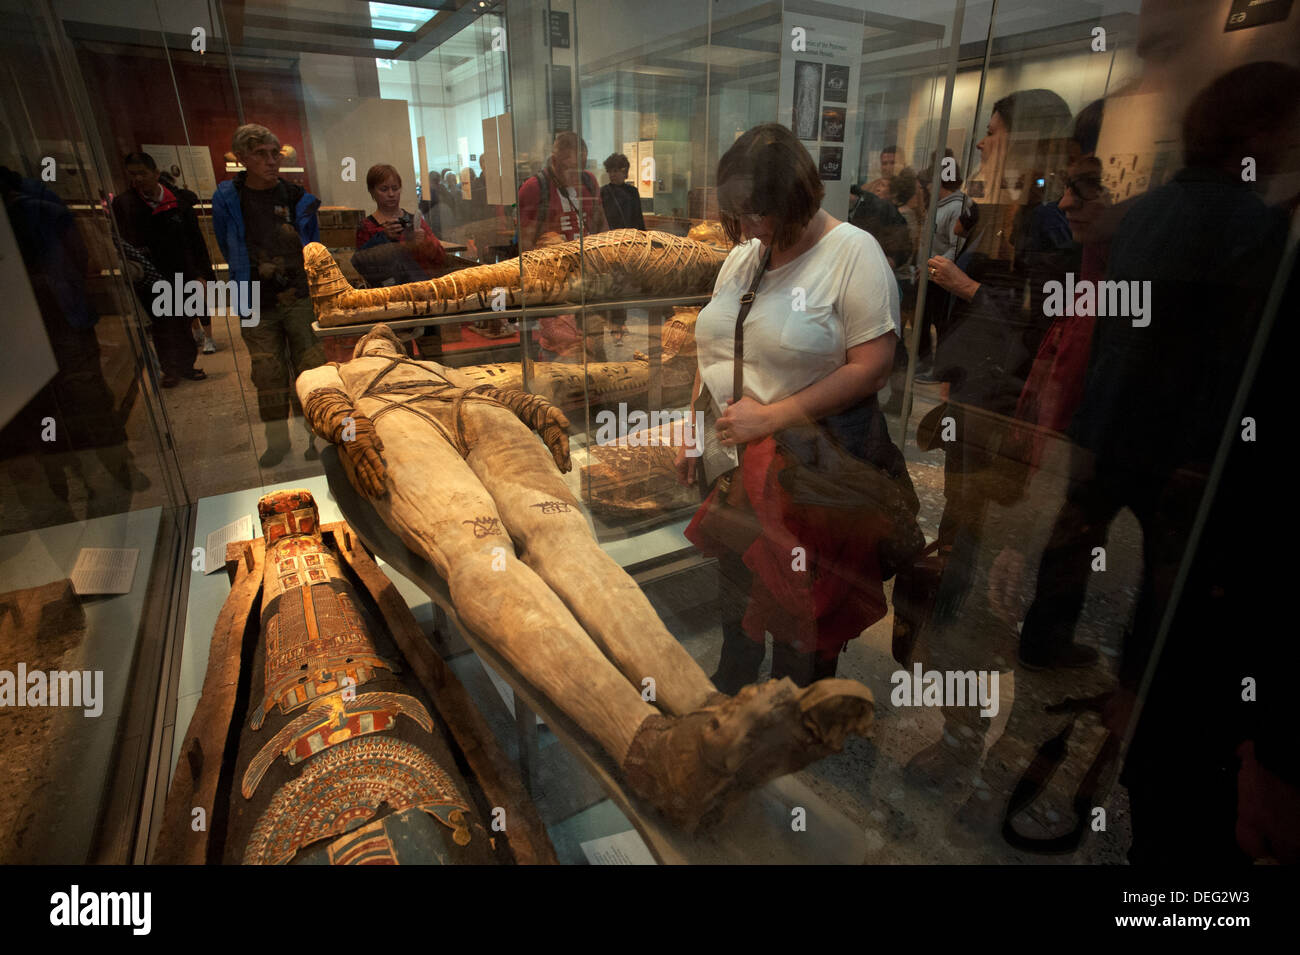 British Museum, London, England. 9-2013 Visitors enjoy the displays of Mummies in the Egyptian Galleries. Stock Photo